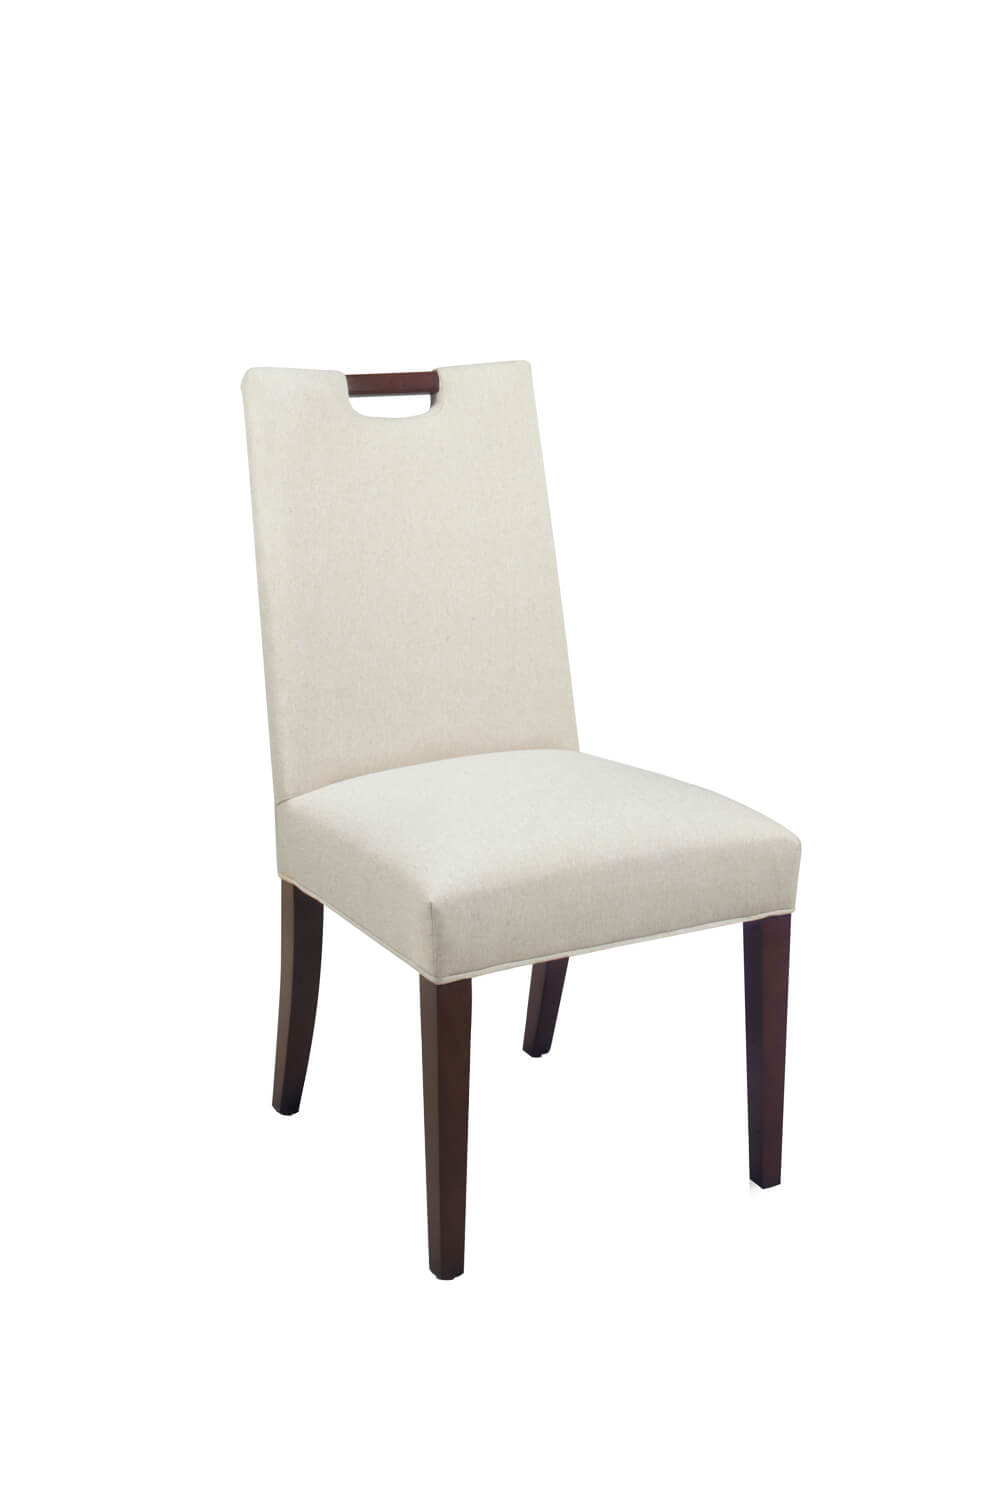 #6644-CH Modern Upholstered Wood Dining Chair